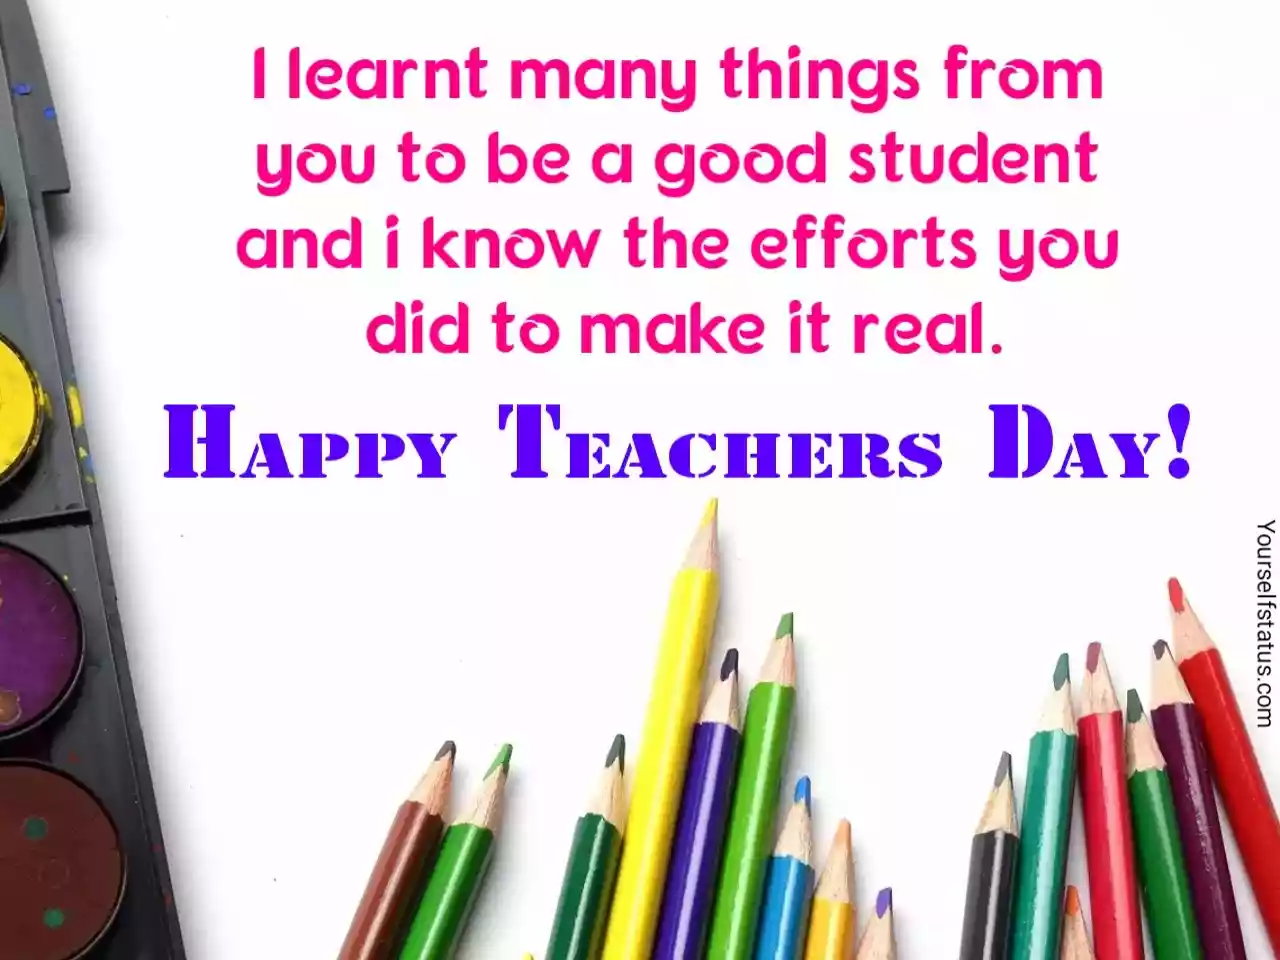 Happy Teachers day wishes 2021: Teachers day,status,quotes,images,sms to  wish your teachers. - YourSelf Status